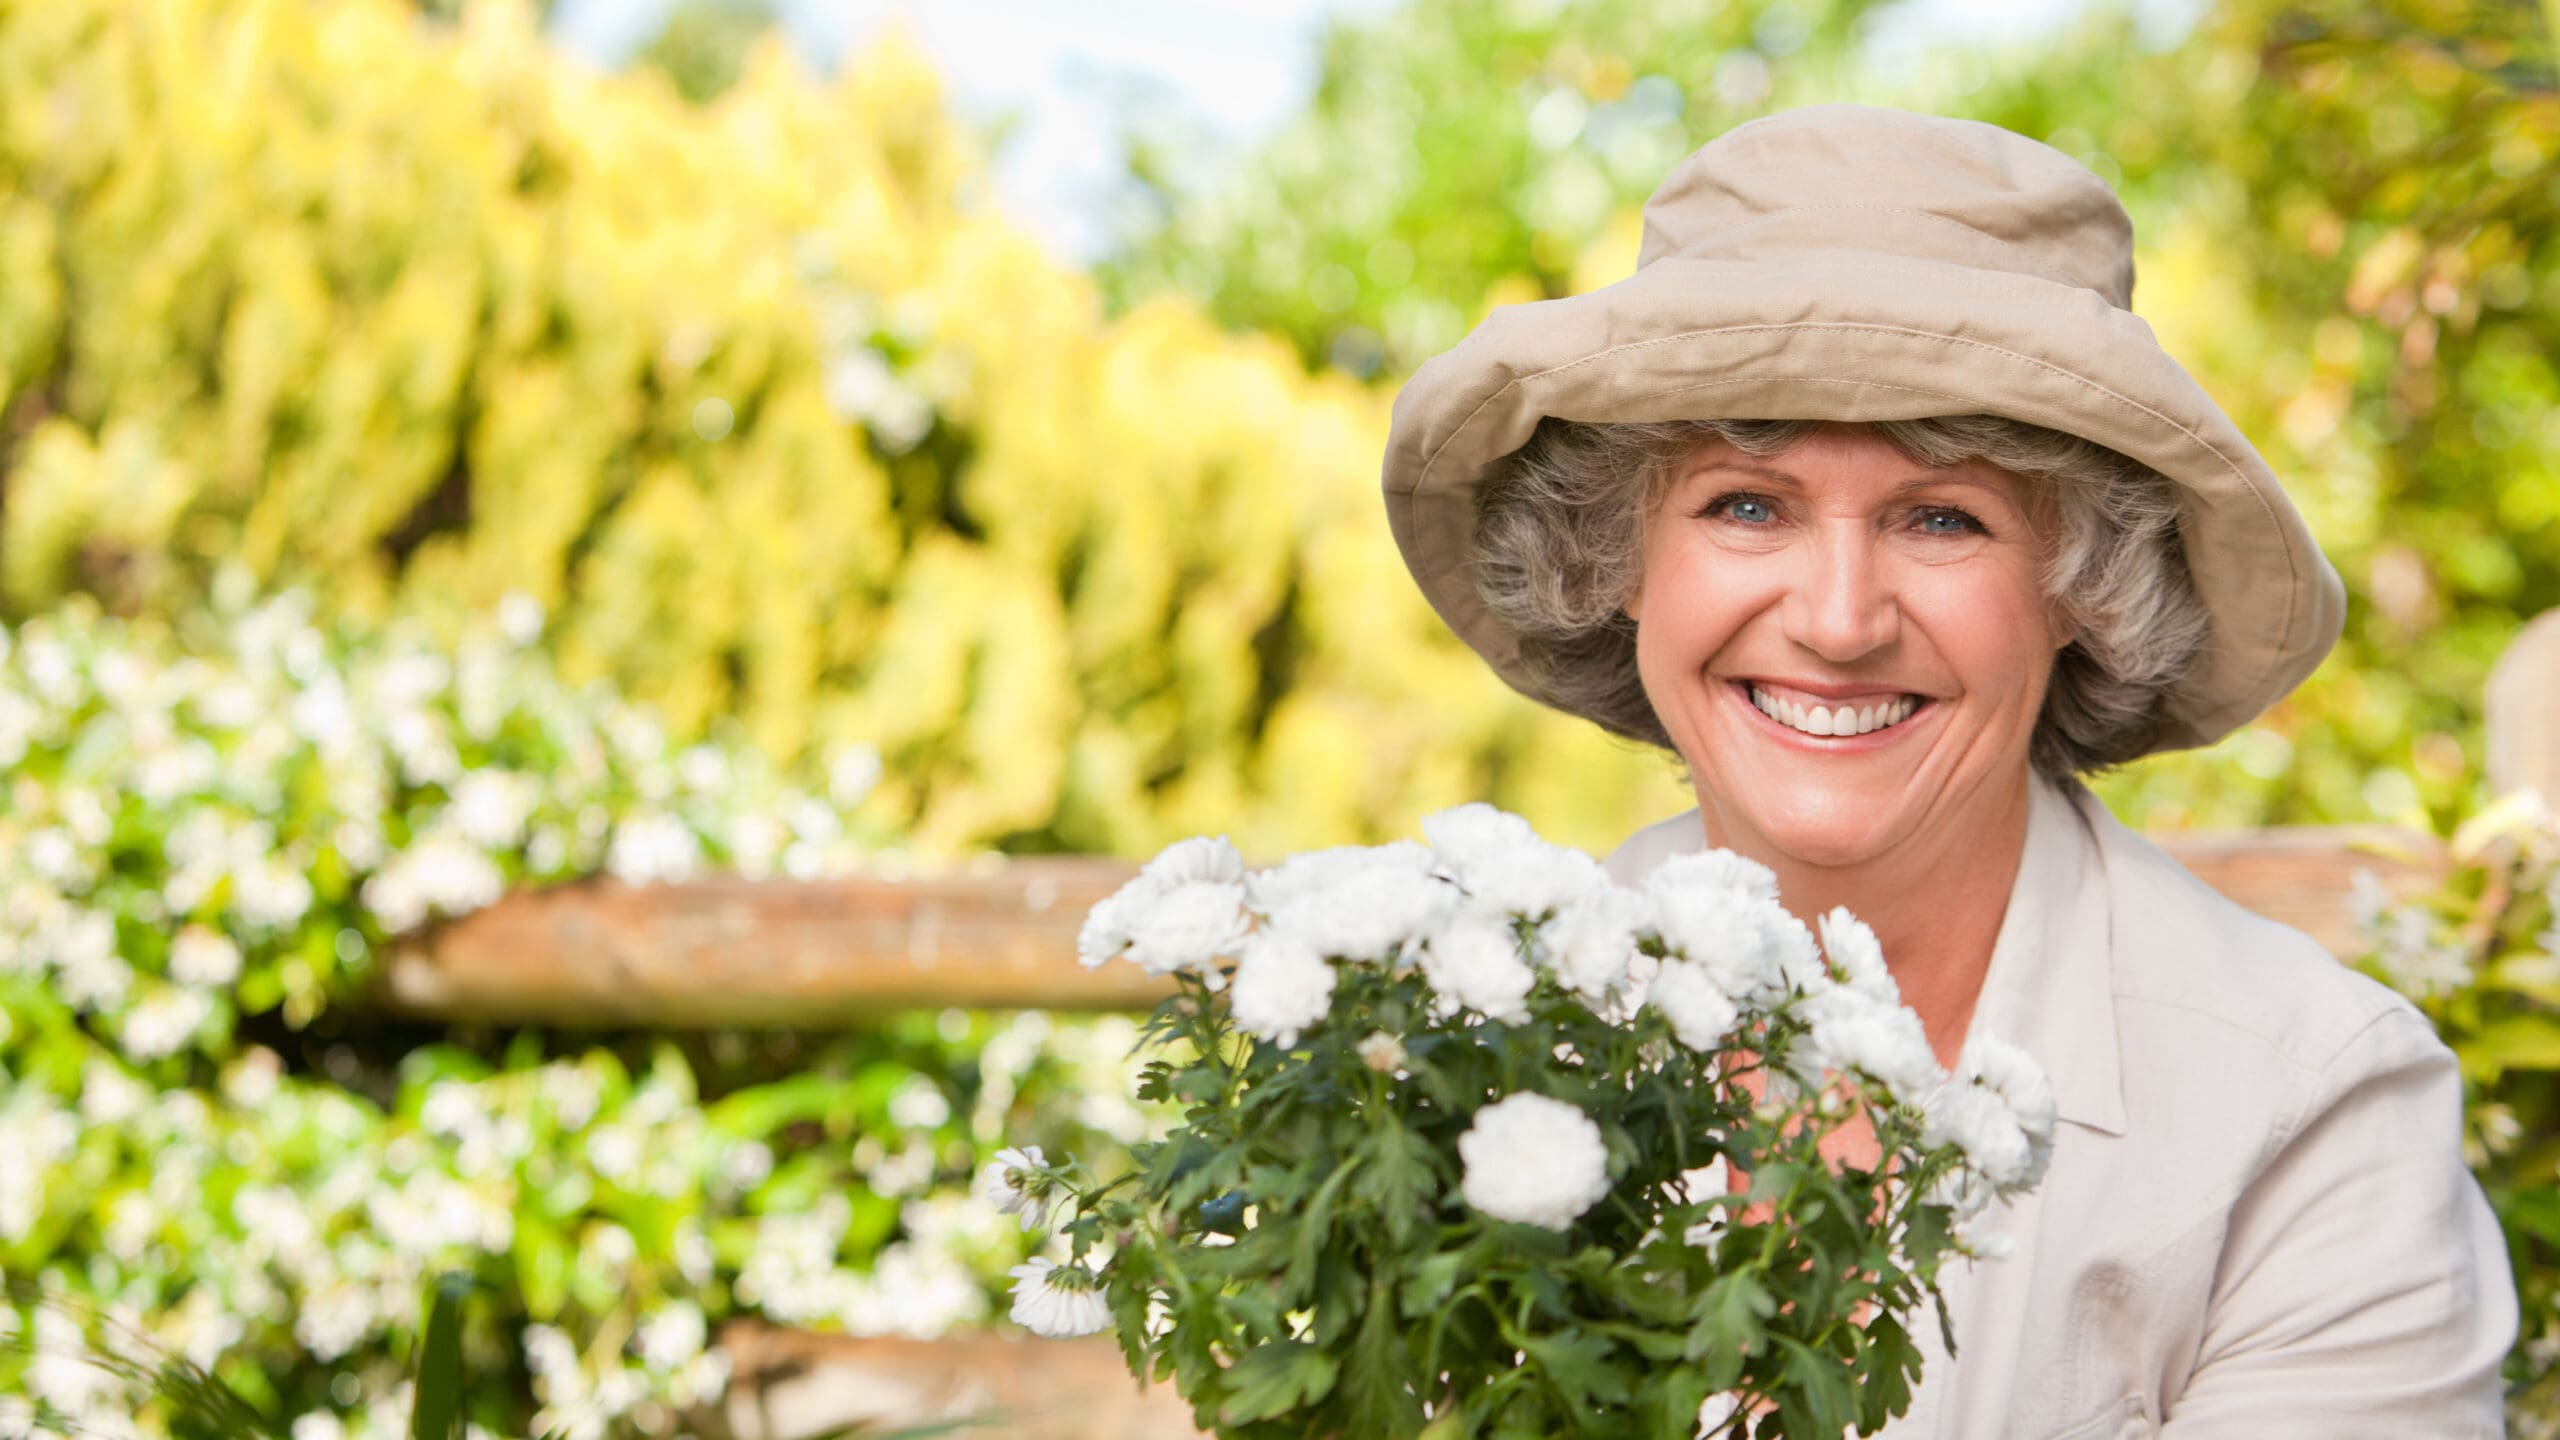 Senior woman smiling with flowers in her hands